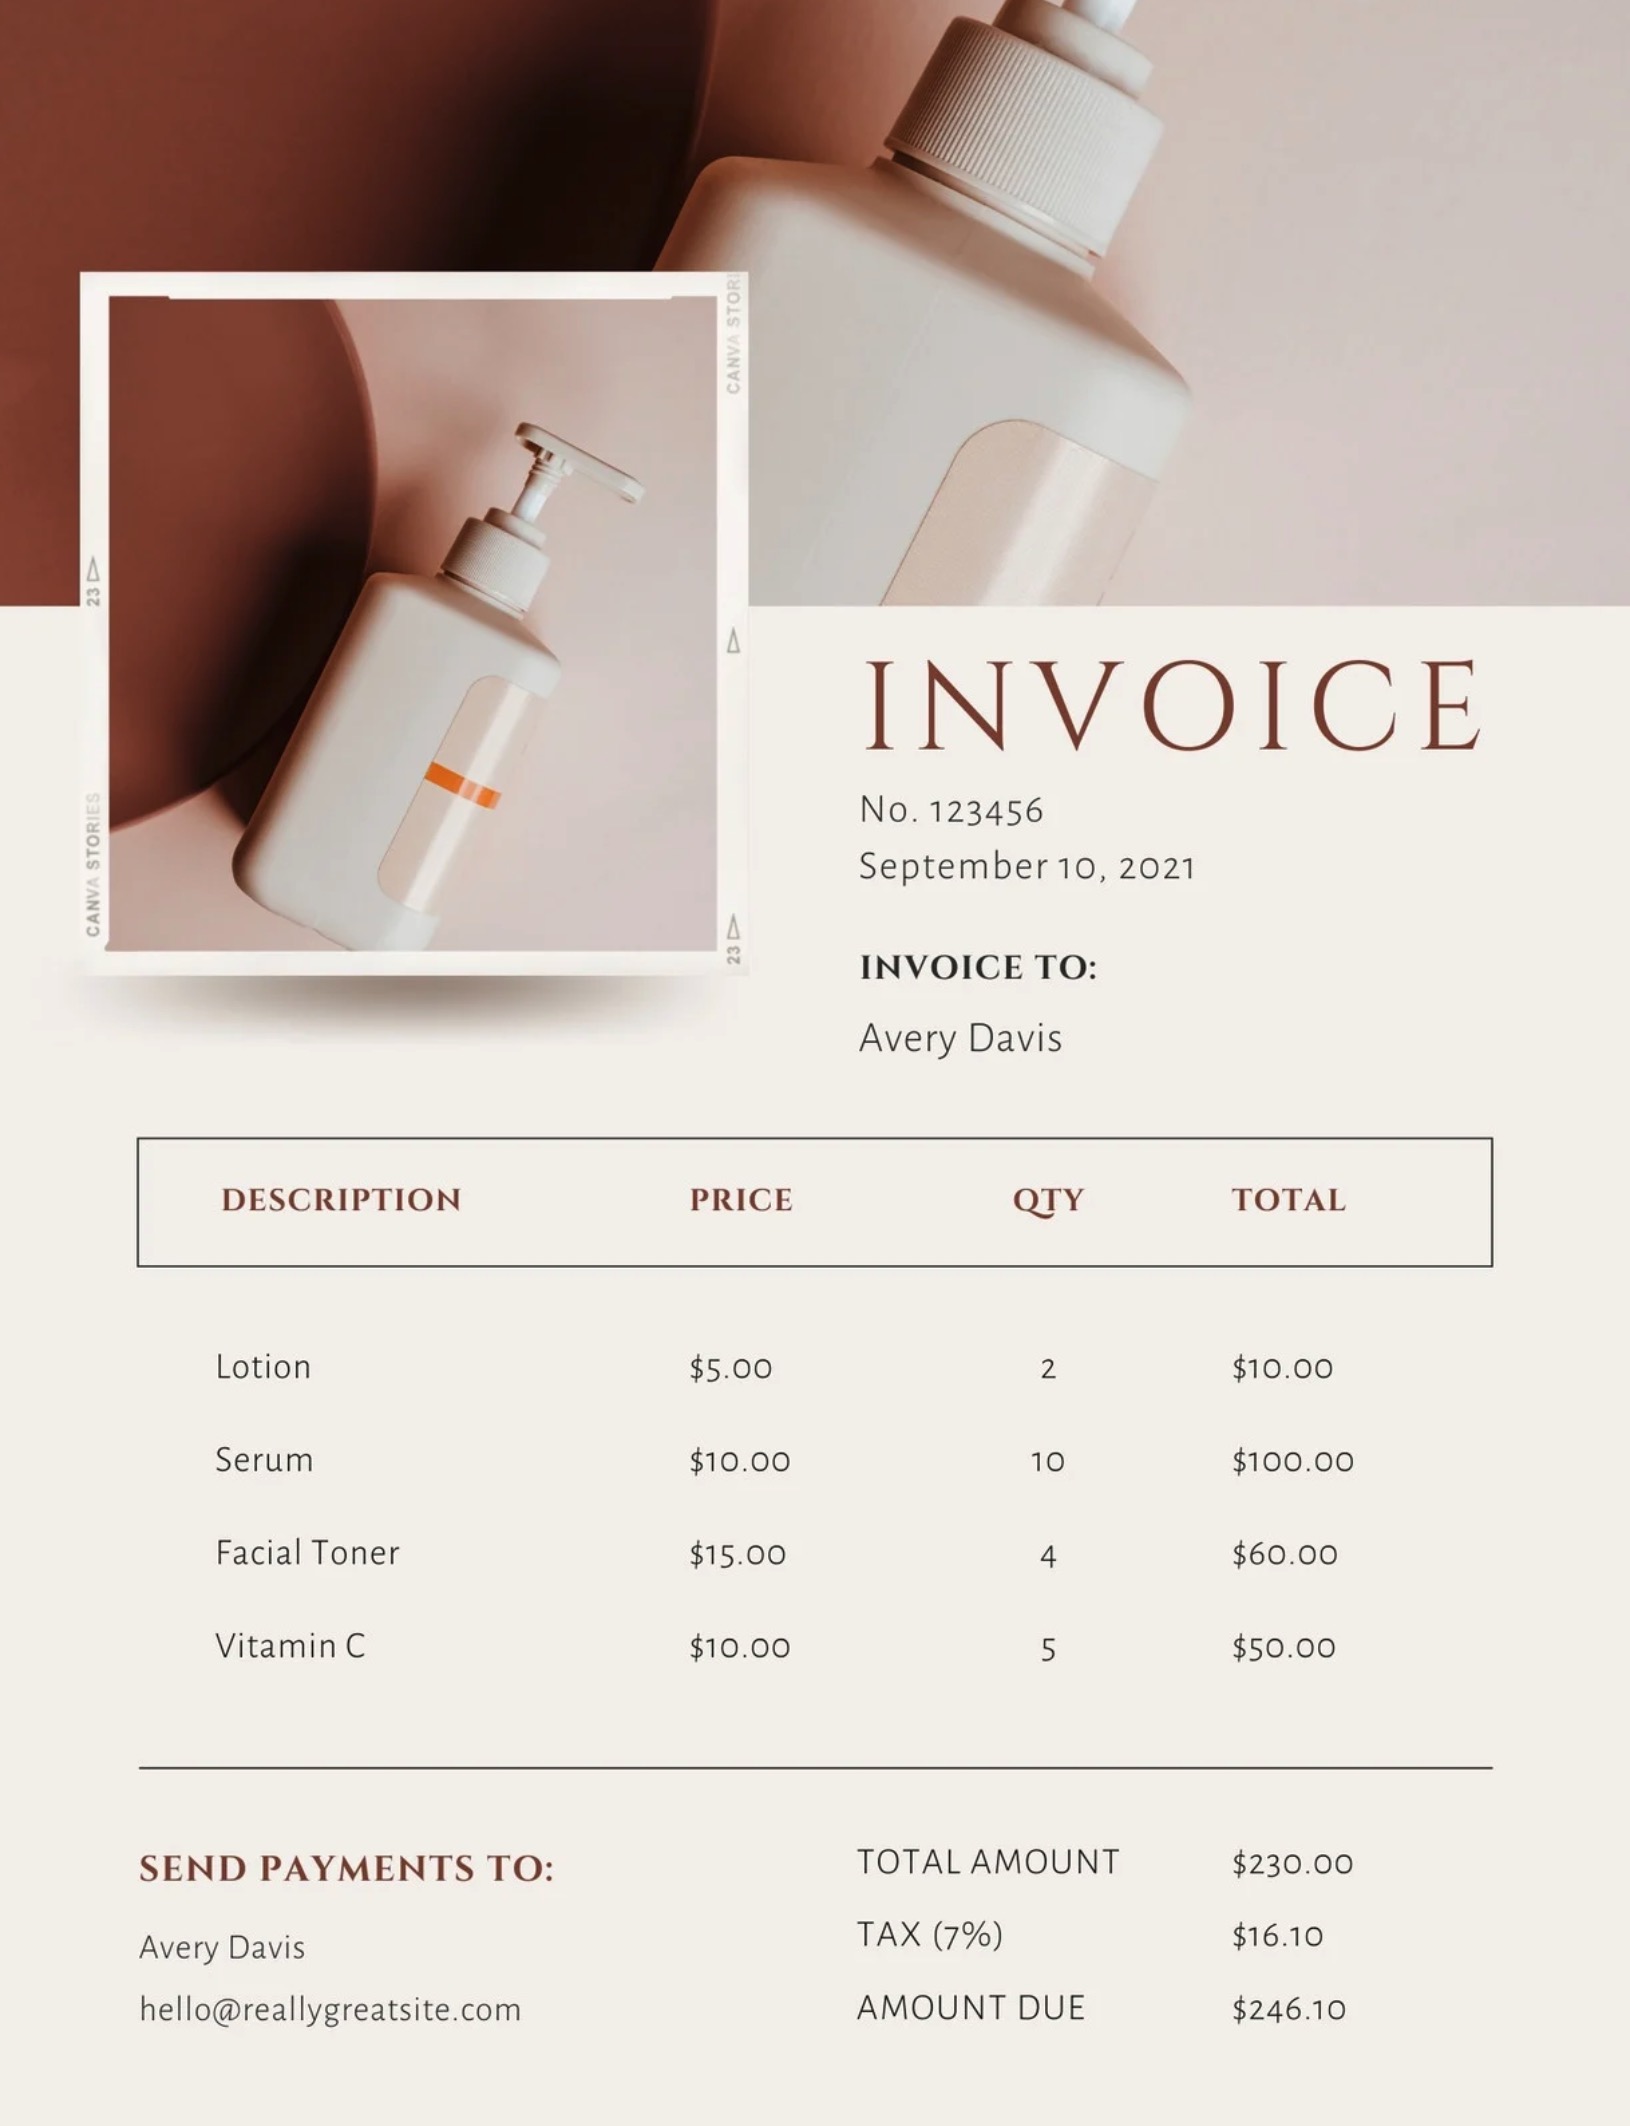 An invoice for a beauty product.